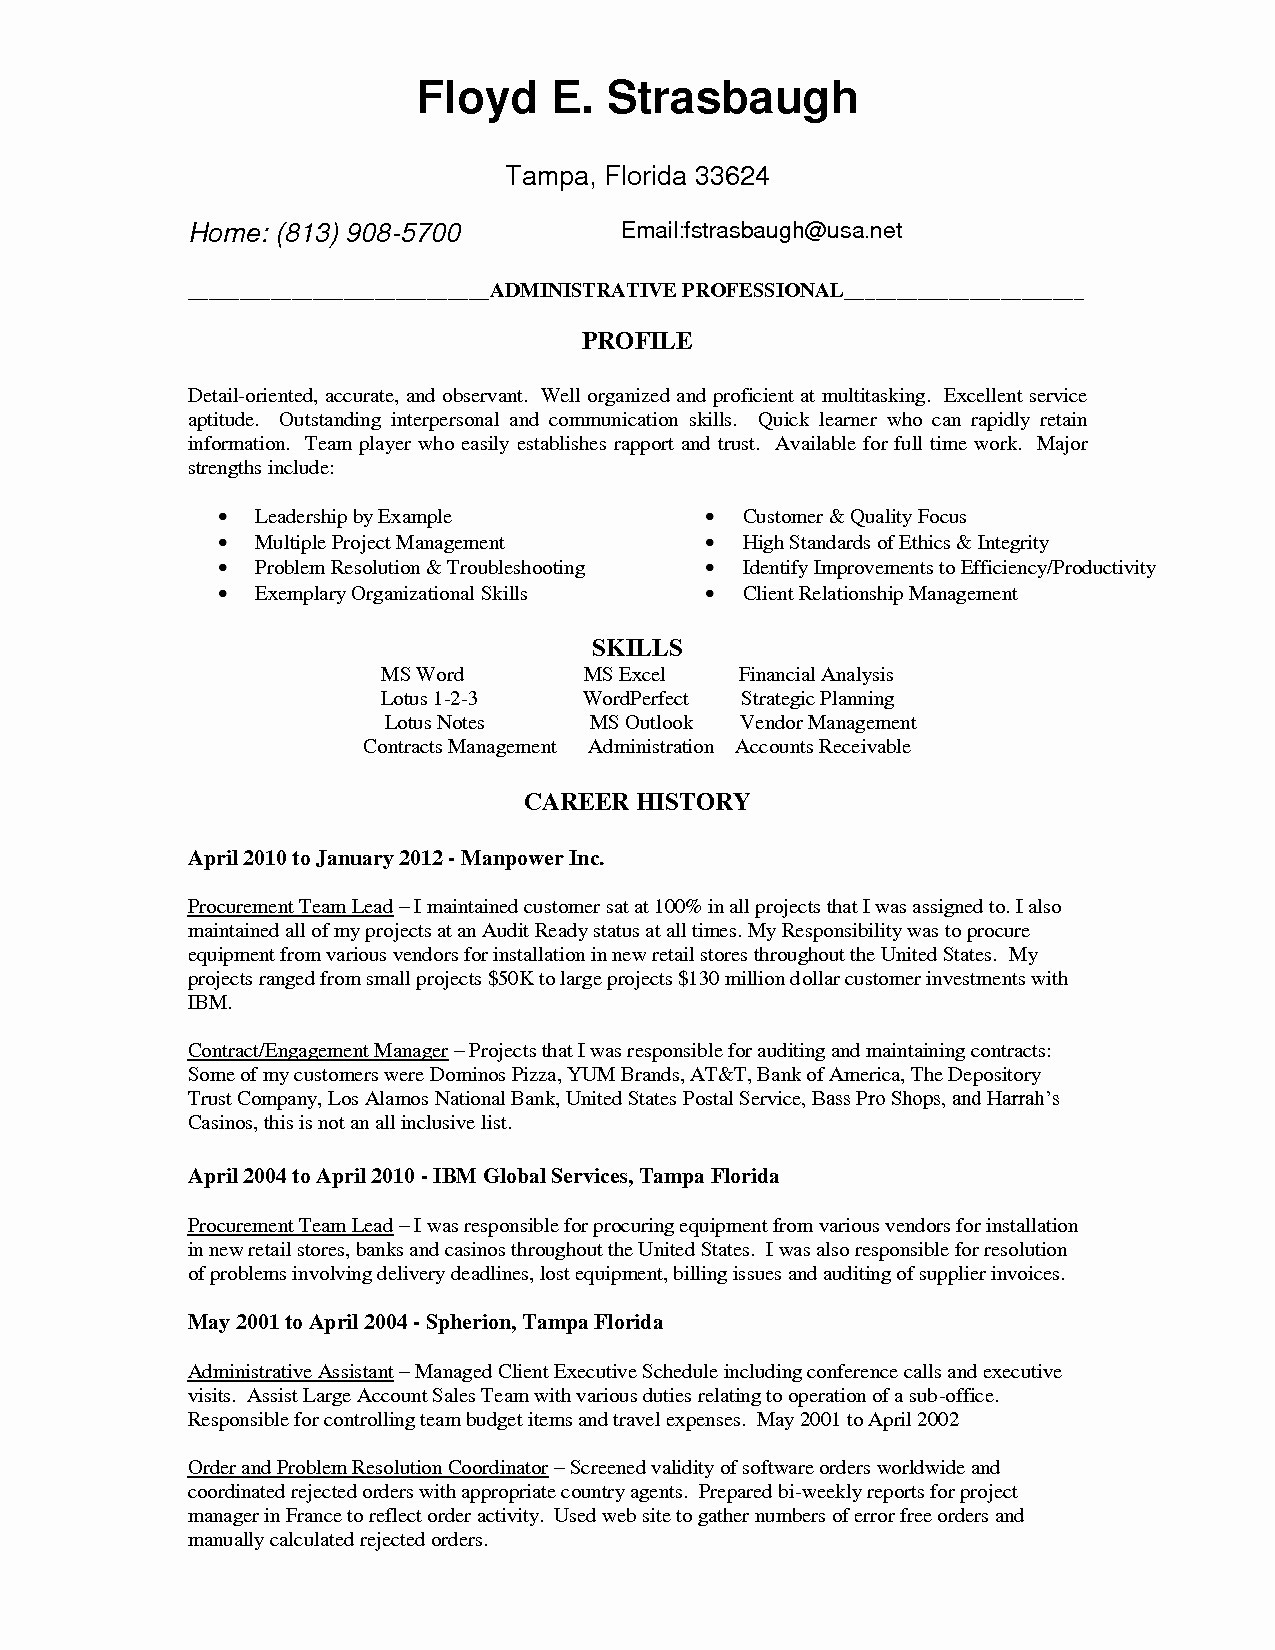 microsoft word resume cover letter template example-Free Microsoft Word Resume Templates Awesome Professional Job Resume Template Od Specialist Cover Letter Lead Staggering Business Ppt Templates Free 5-c